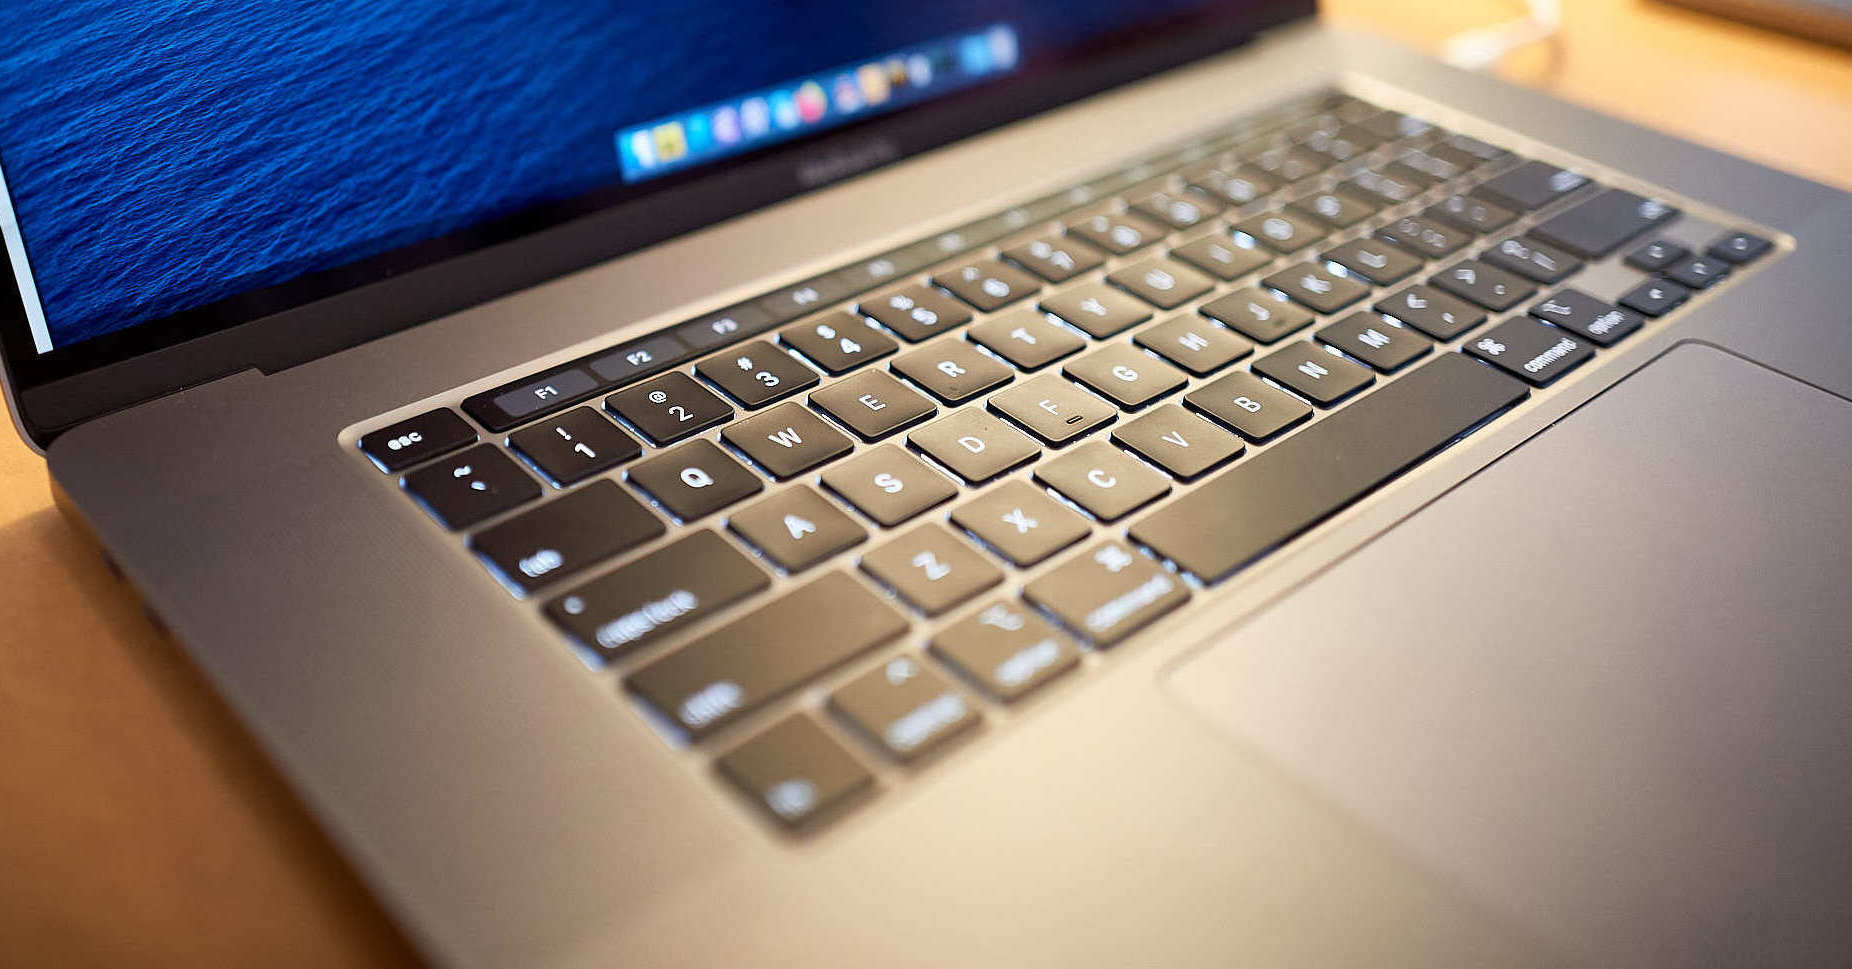 Apple brought back MagSafe on the new MacBook Pro - The Verge